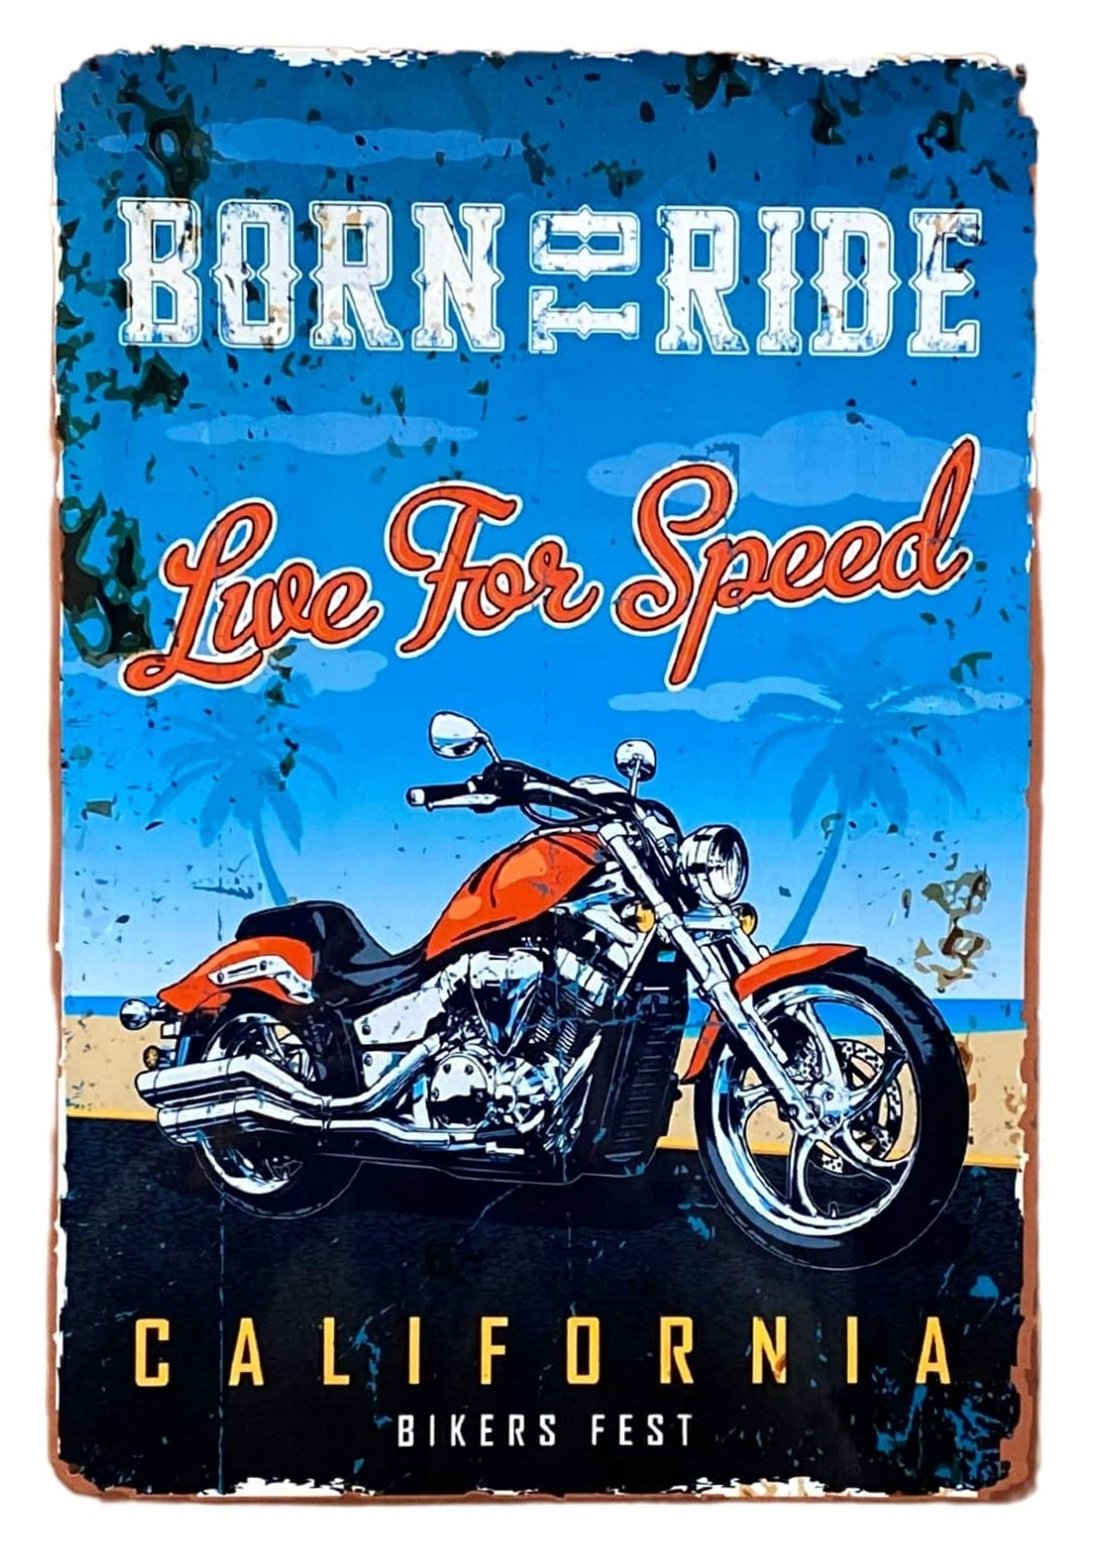 Metal Retro Wall Sign - Born To Ride